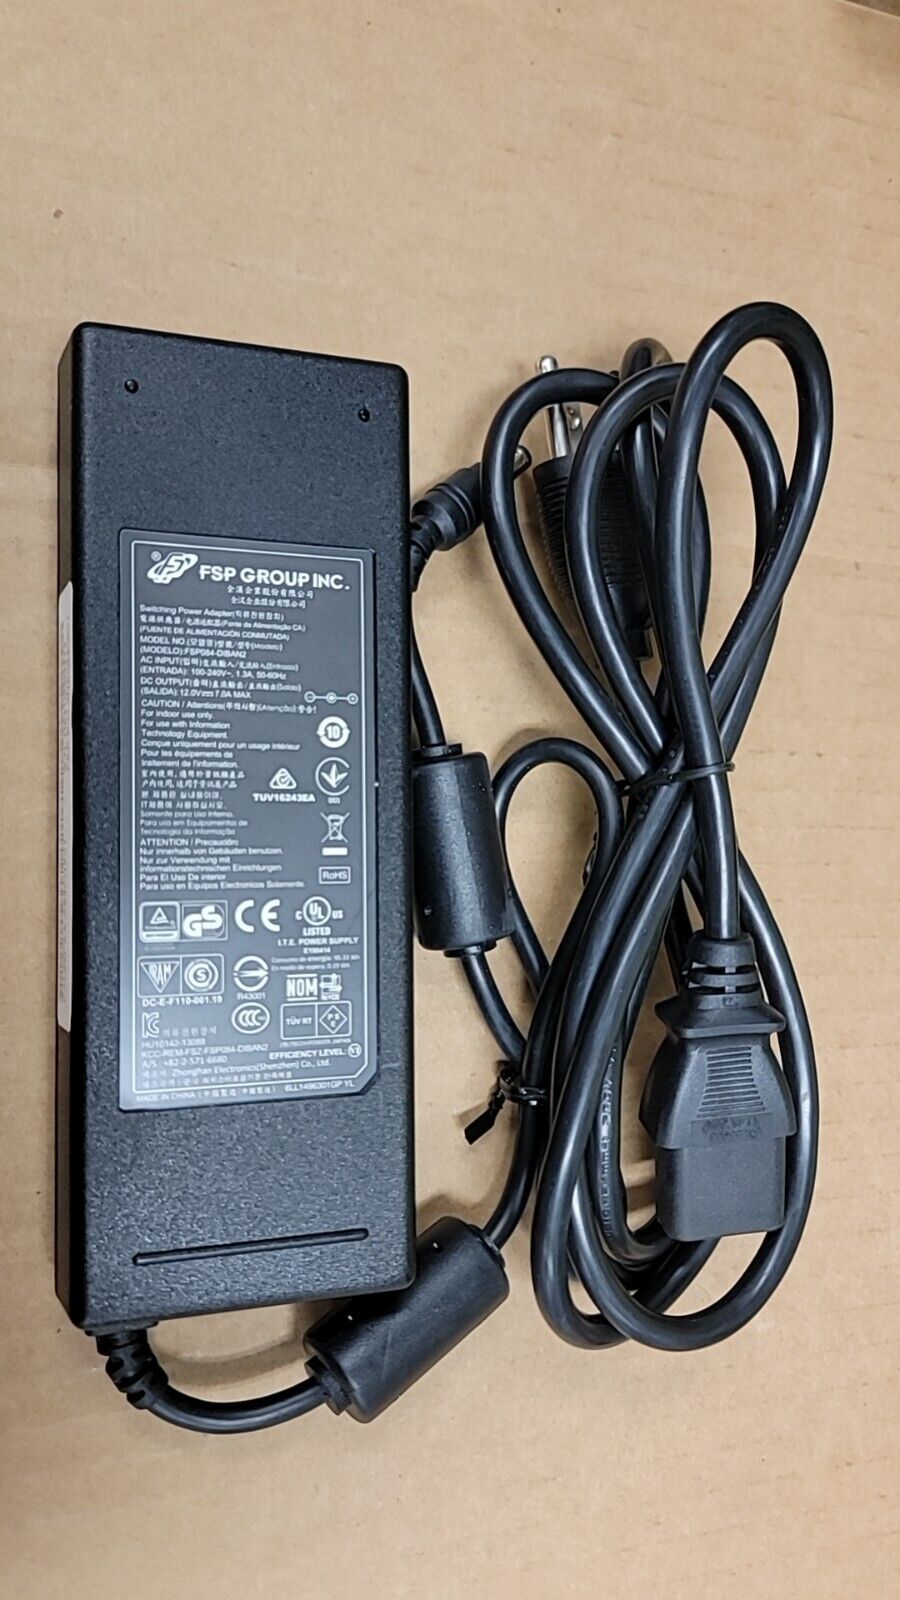 Original FSP FSP084-DIBAN2 AC Switching Power Adapter 12V 7A 84W W/ P. Cord Brand FSP Type Adapter Connection Split/Dup - Click Image to Close